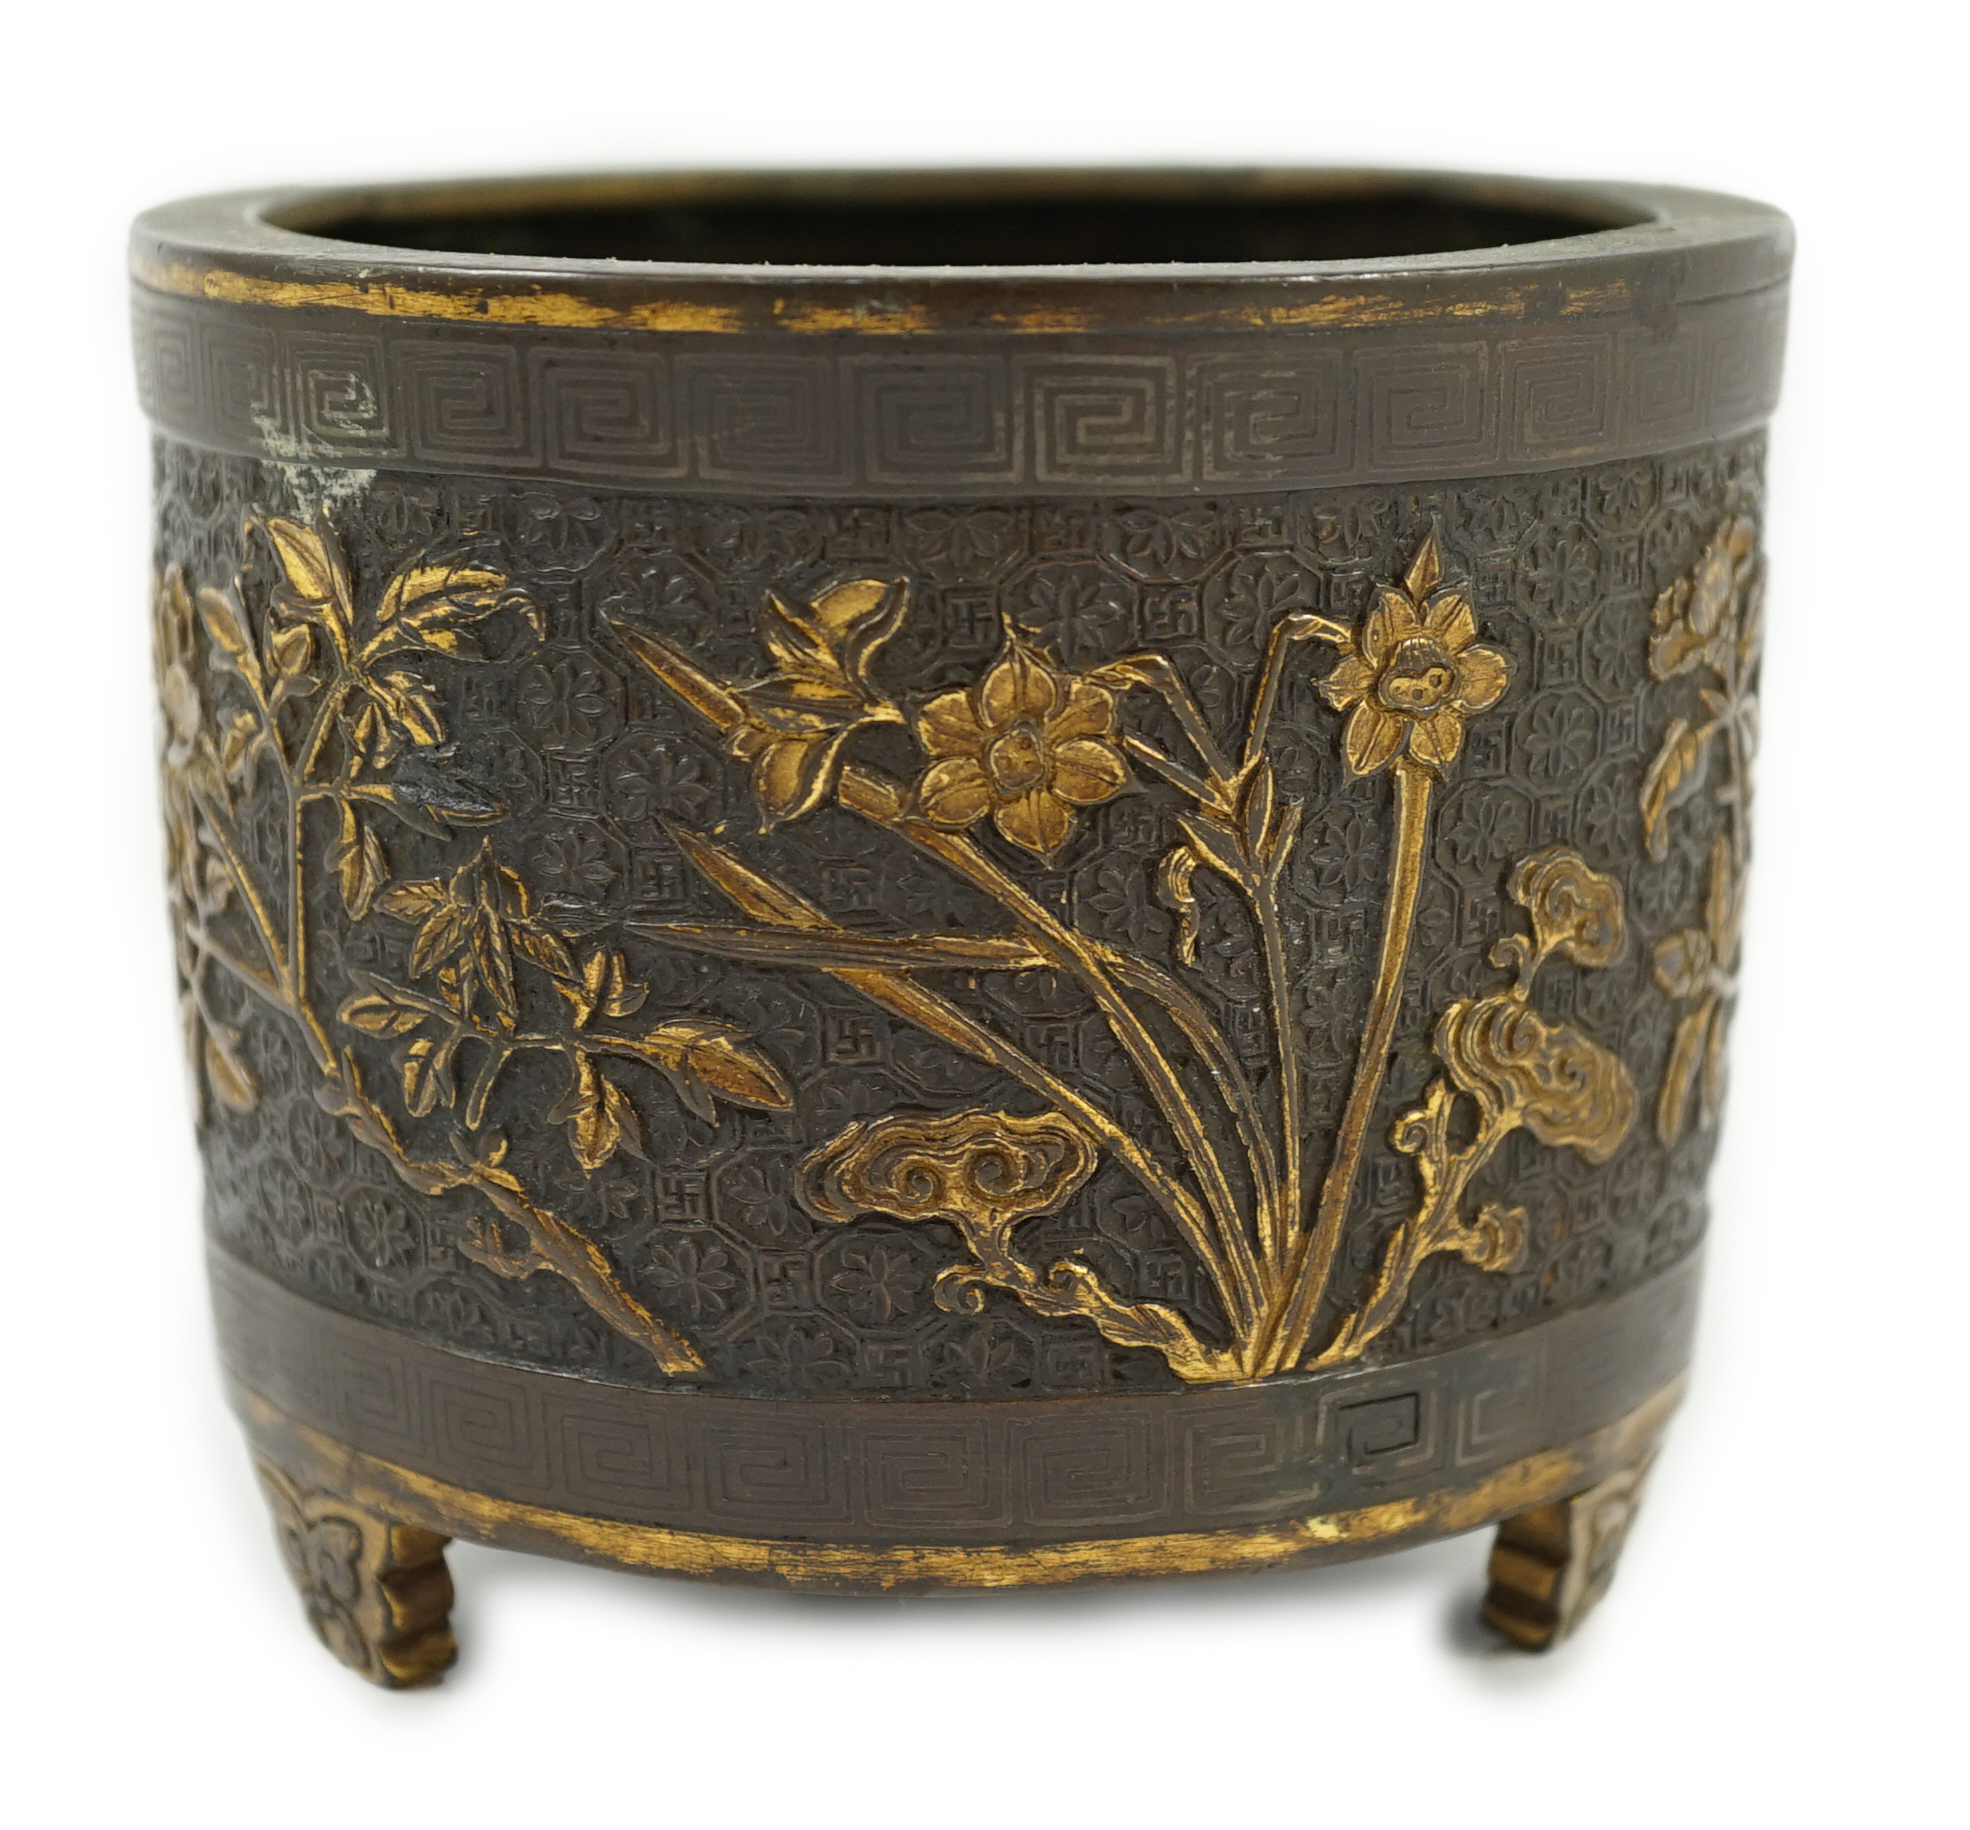 A Chinese parcel-gilt and silver inlaid bronze tripod censer, Yunjian Hu Wenming mark, 16th/17th century, small dents and three rim splits